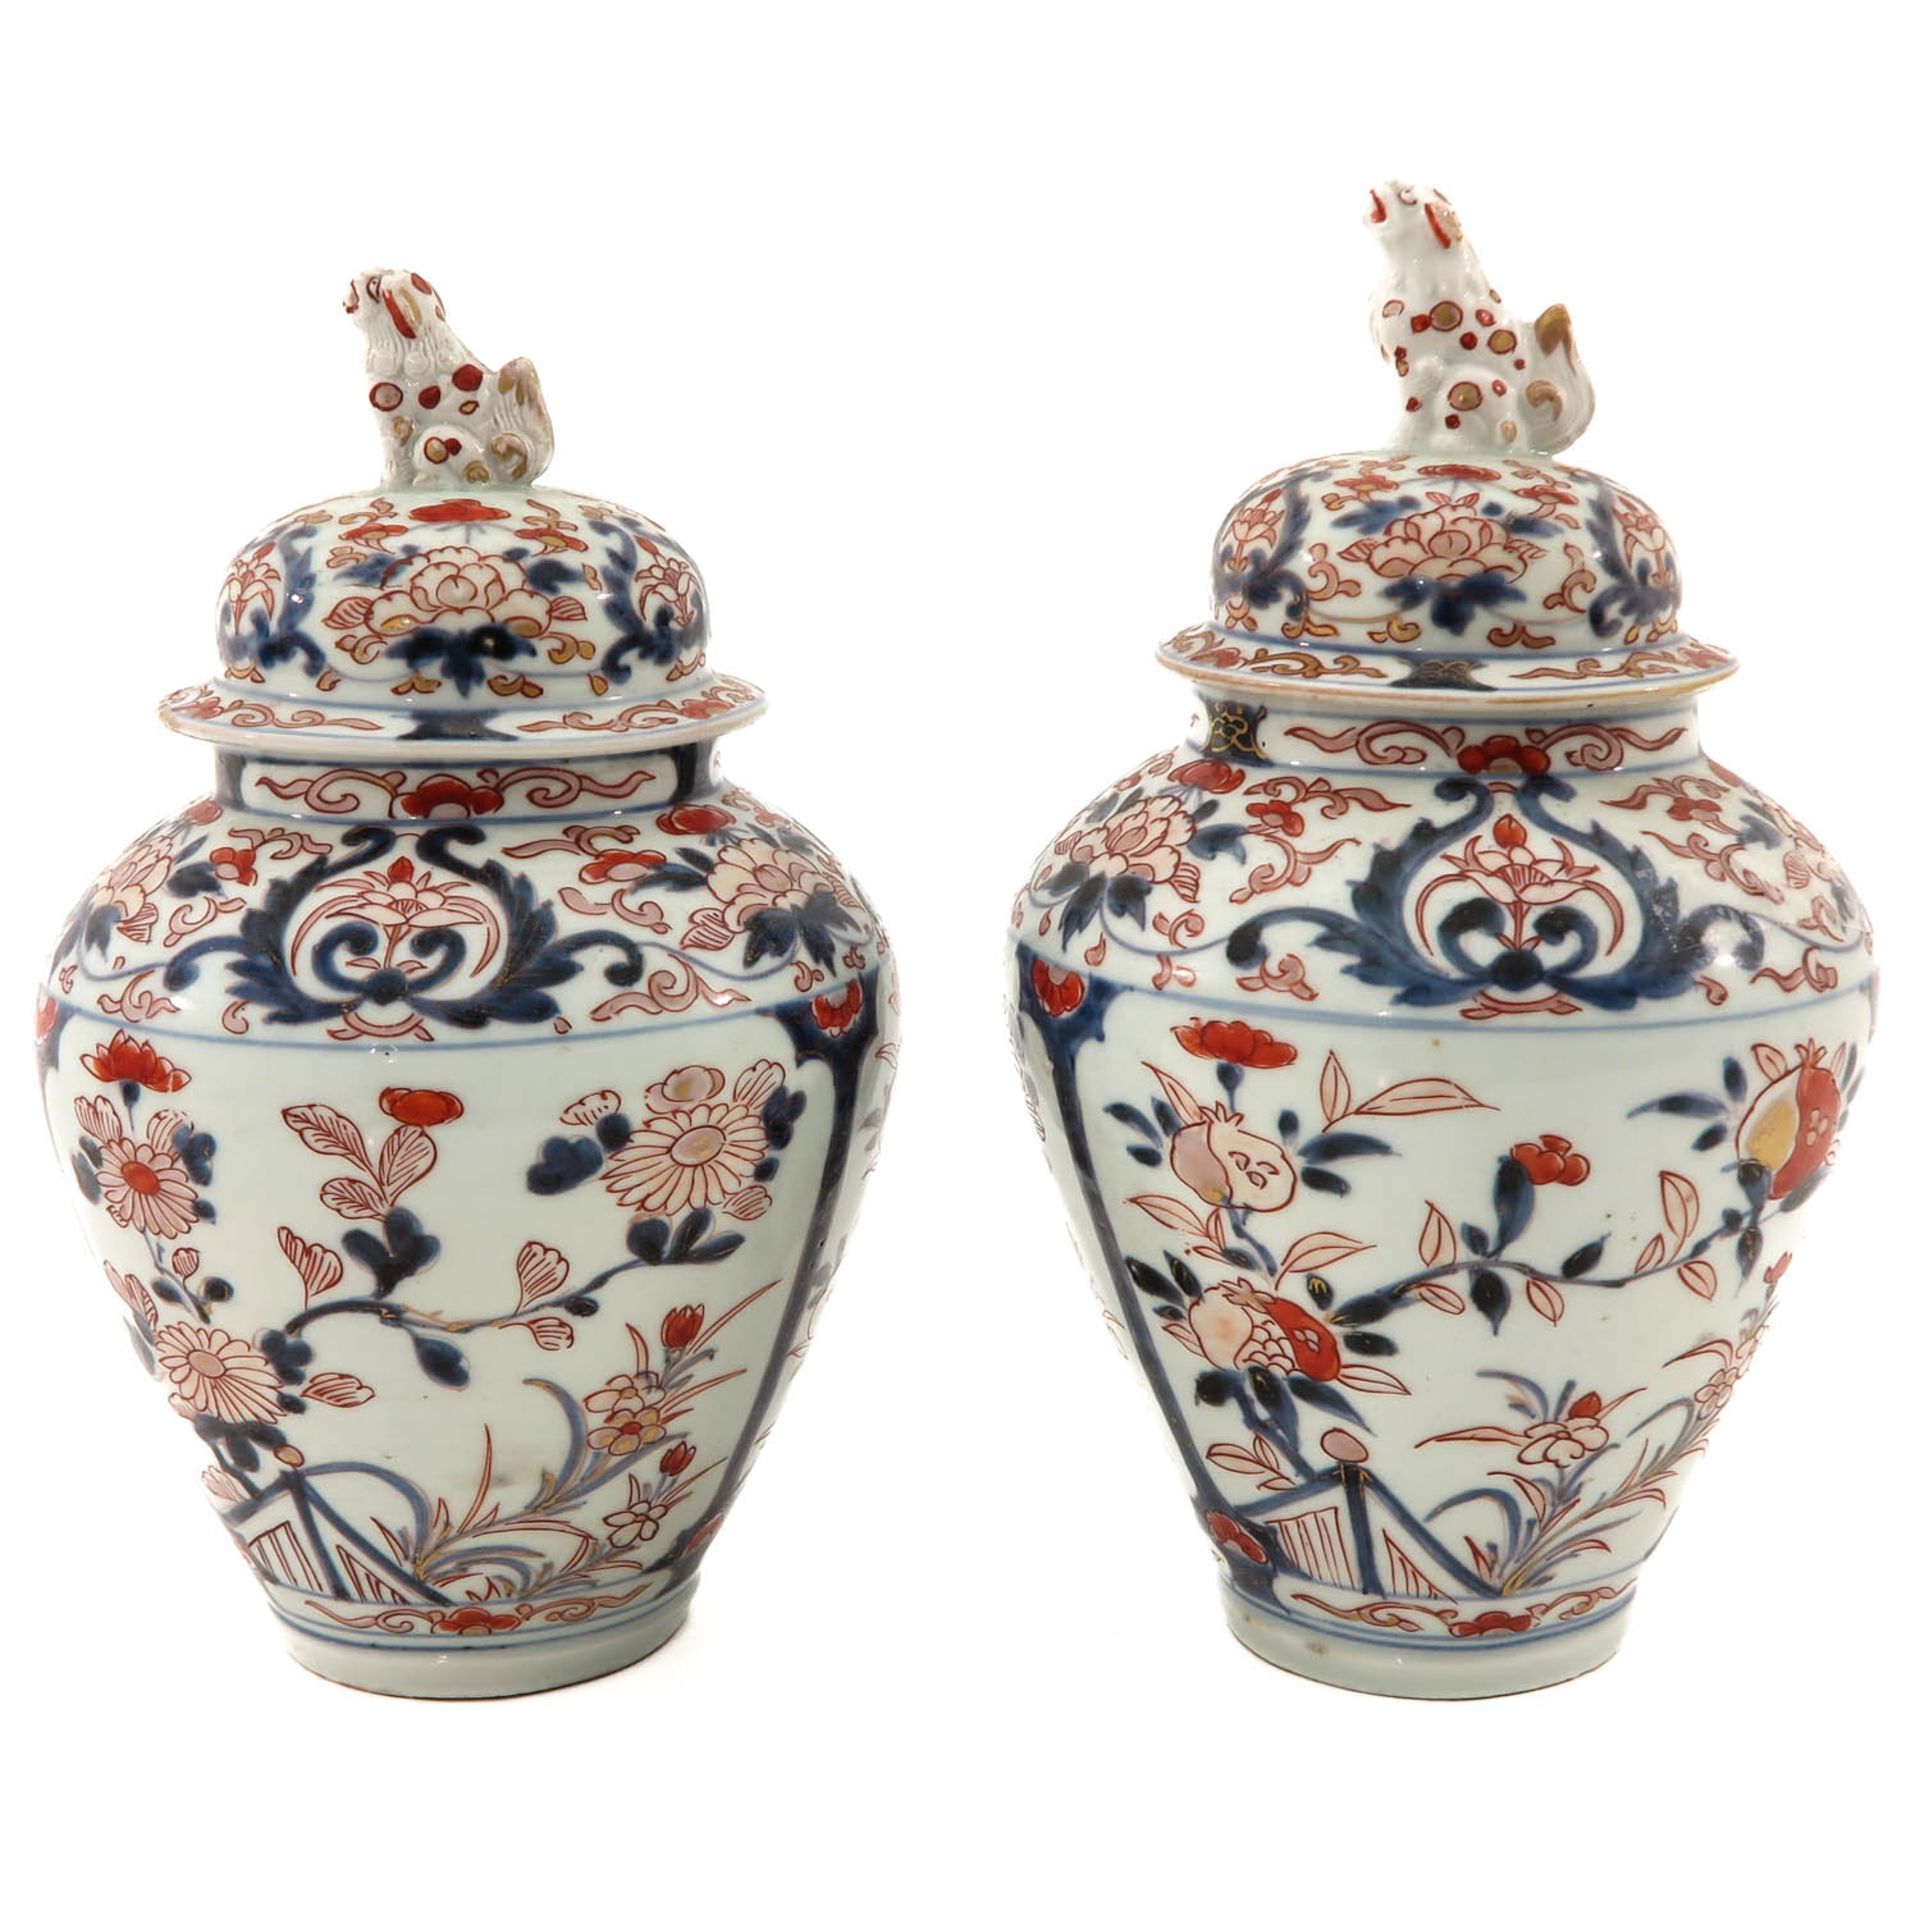 A Pair of Arita Jars with Covers